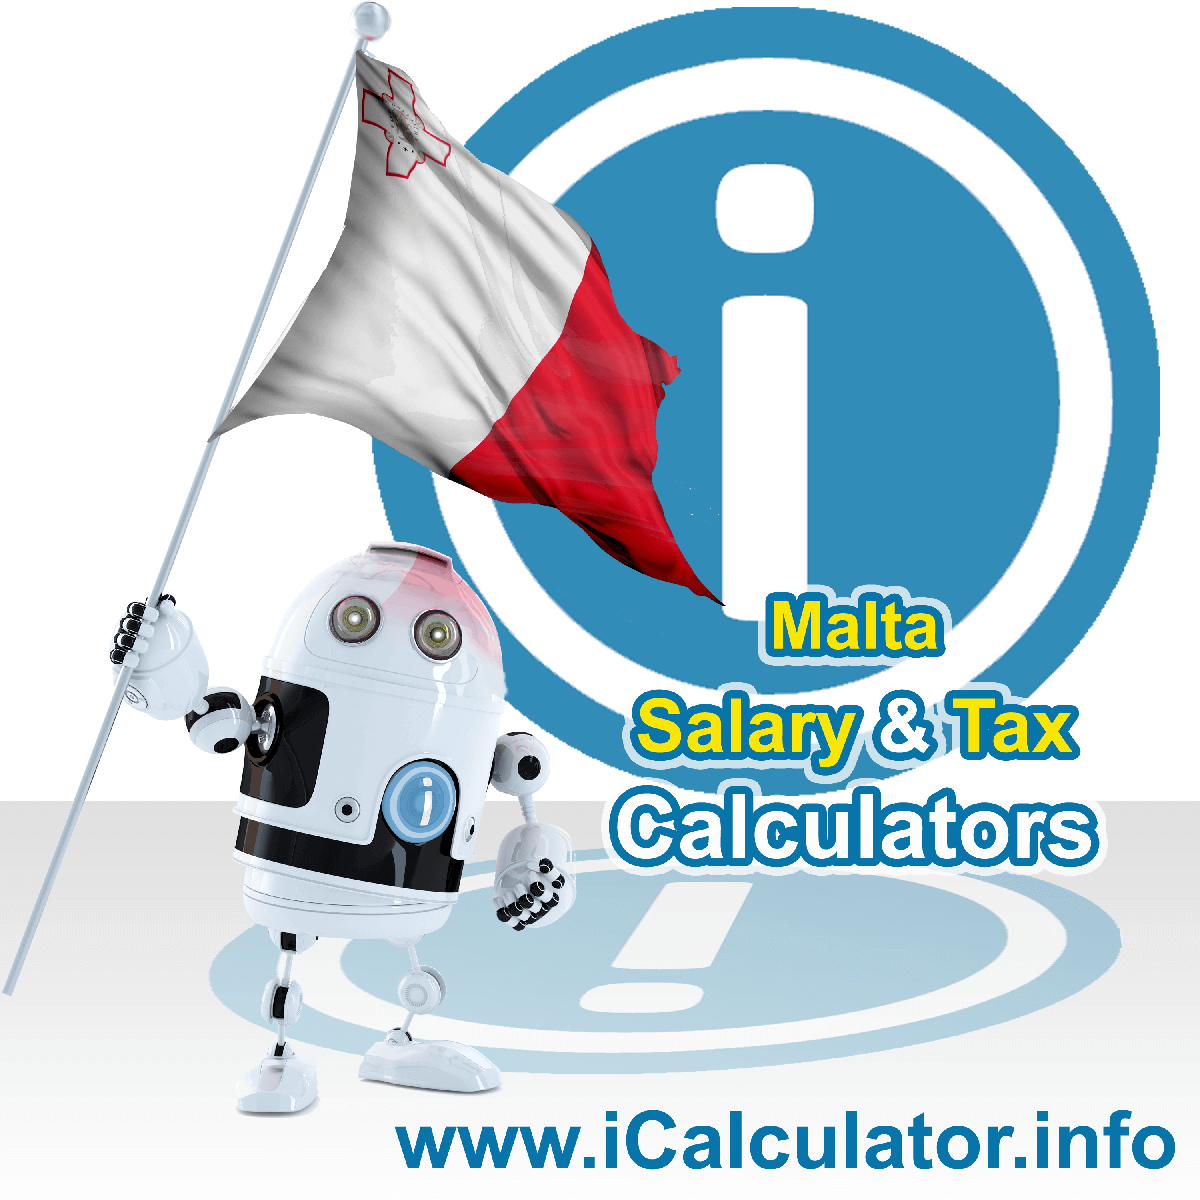 Malta Tax Calculator. This image shows the Malta flag and information relating to the tax formula for the Malta Salary Calculator